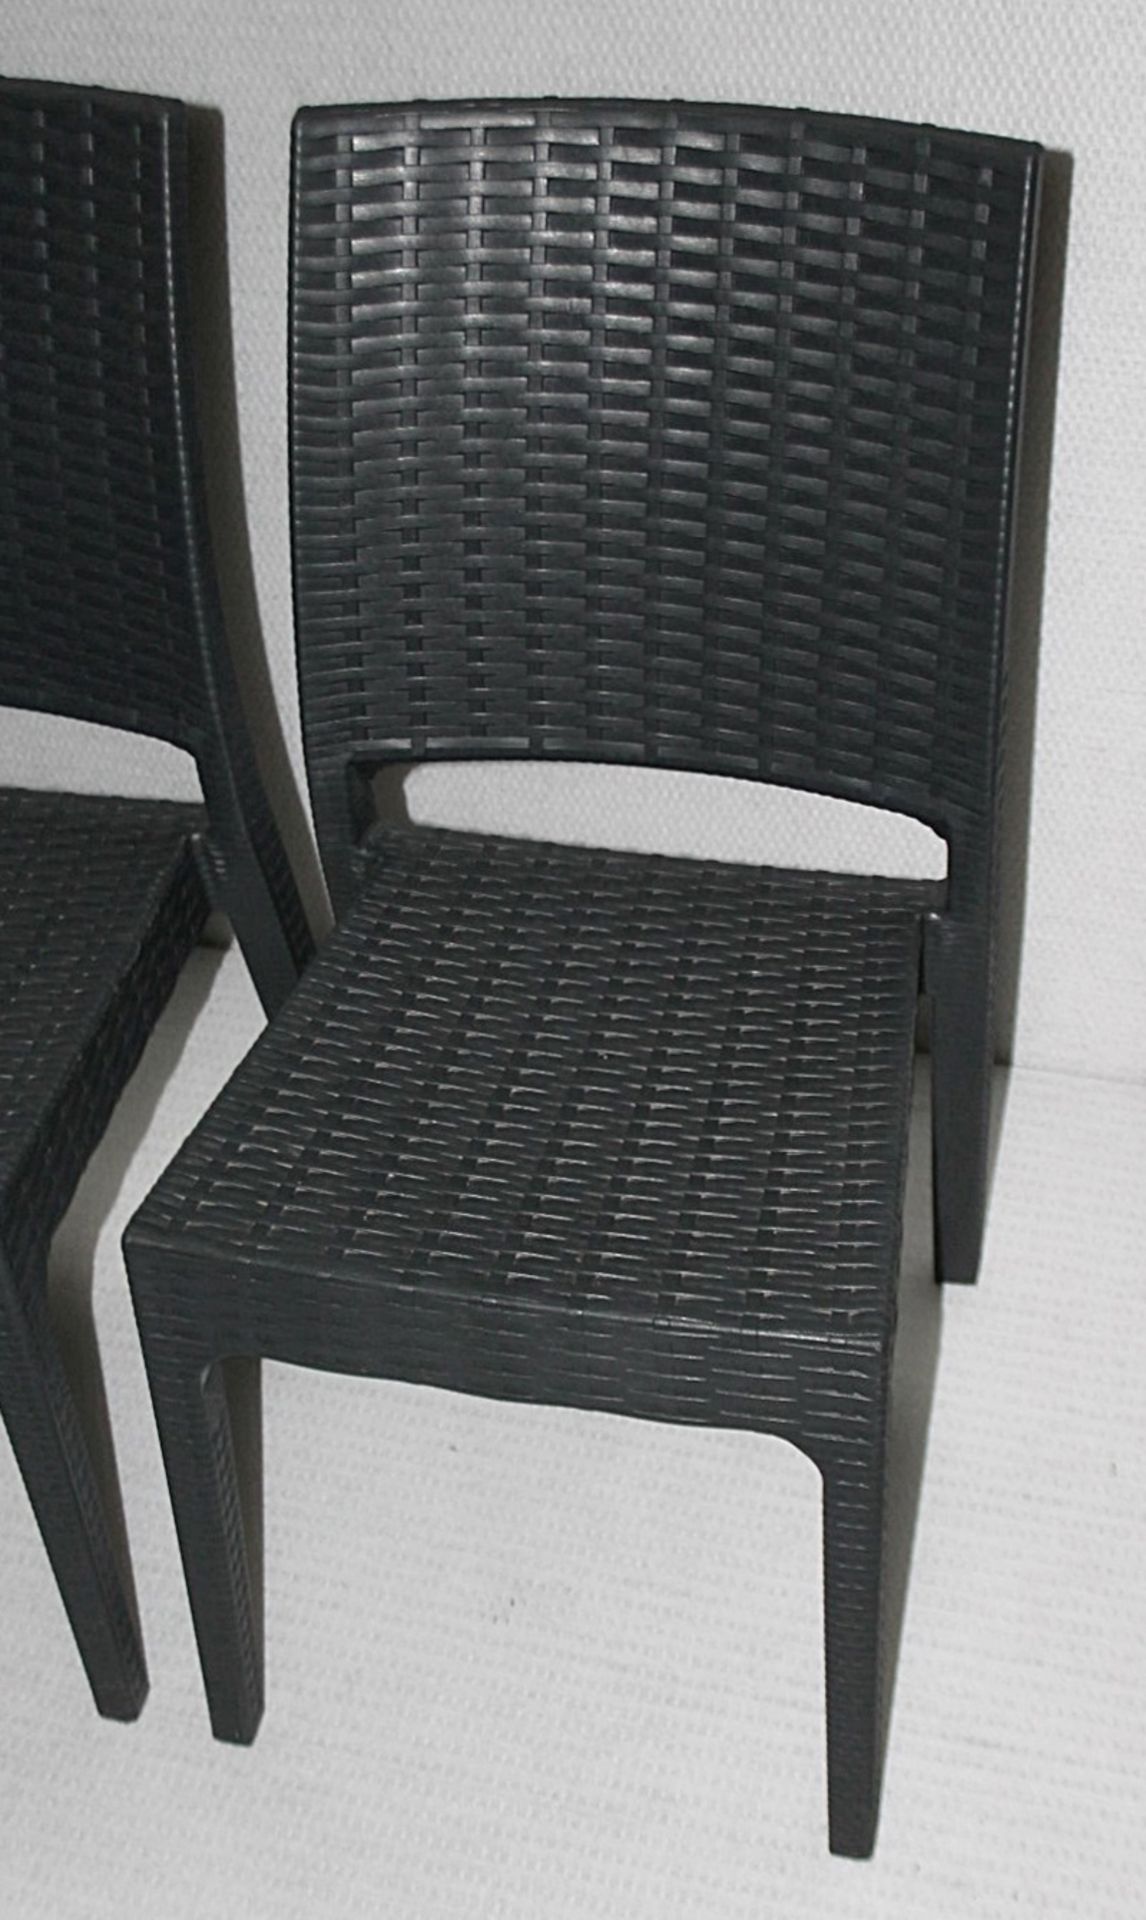 8 x SIESTA EXCLUSIVE 'Florida' Commercial Stackable Rattan-style Chairs In Dark Grey - CL987 - - Image 2 of 13